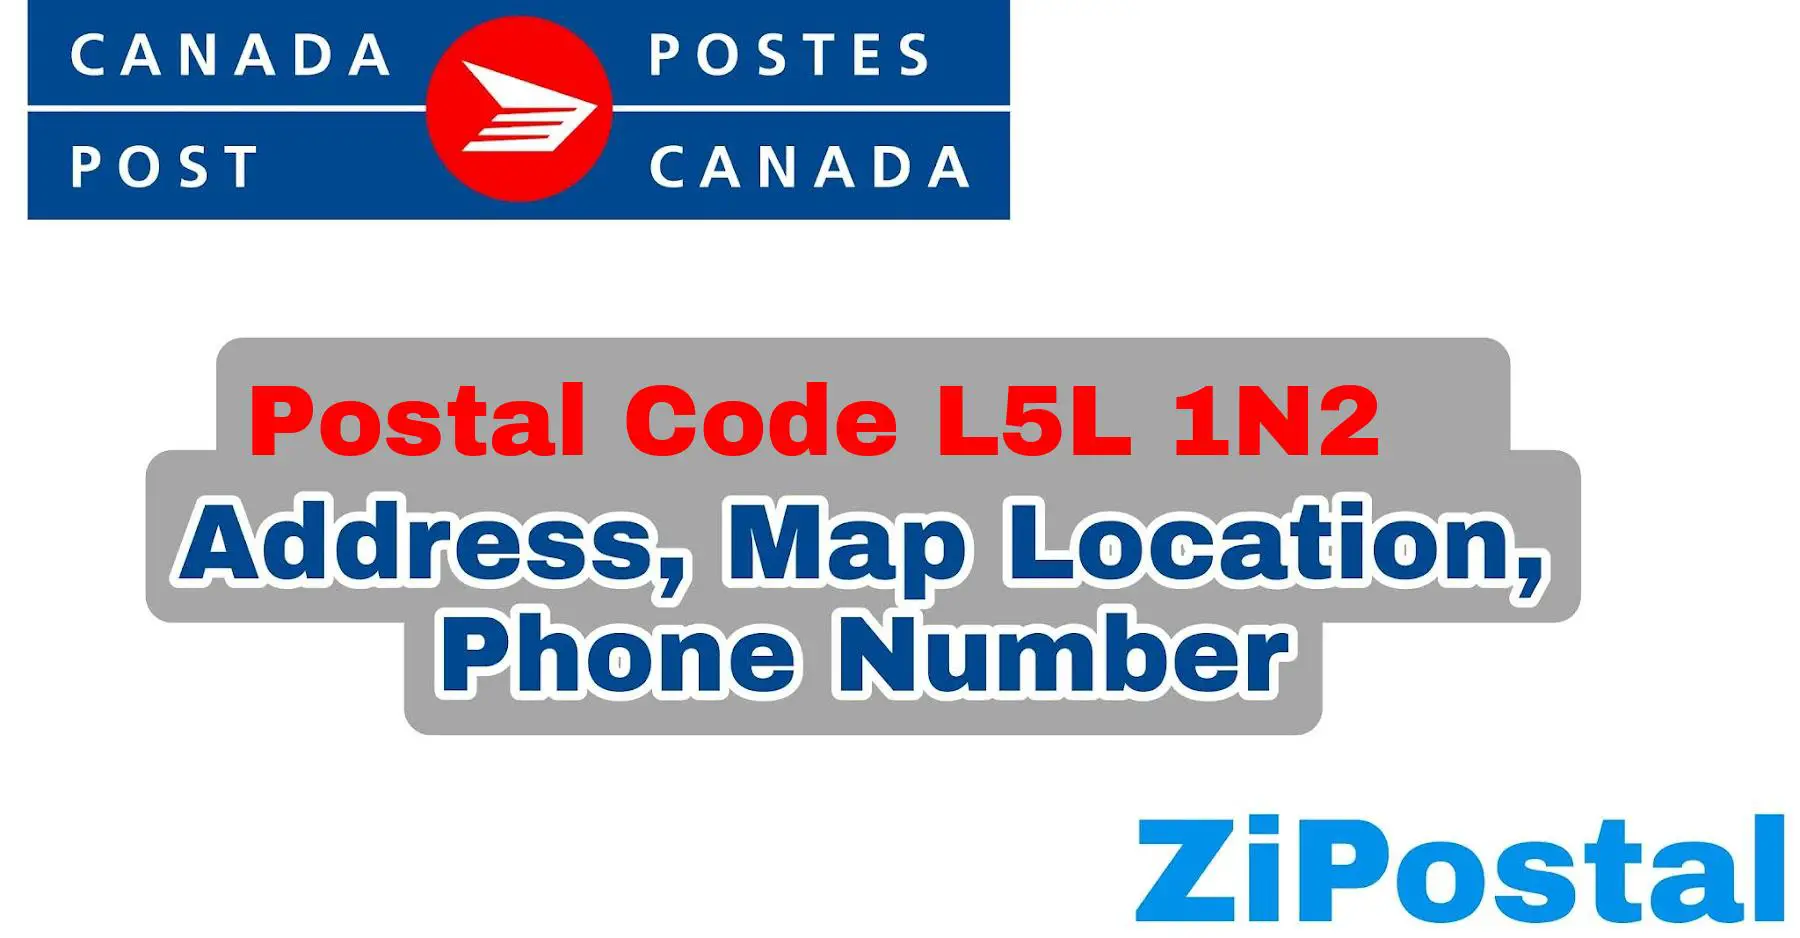 Postal Code L5L 1N2 Address Map Location and Phone Number